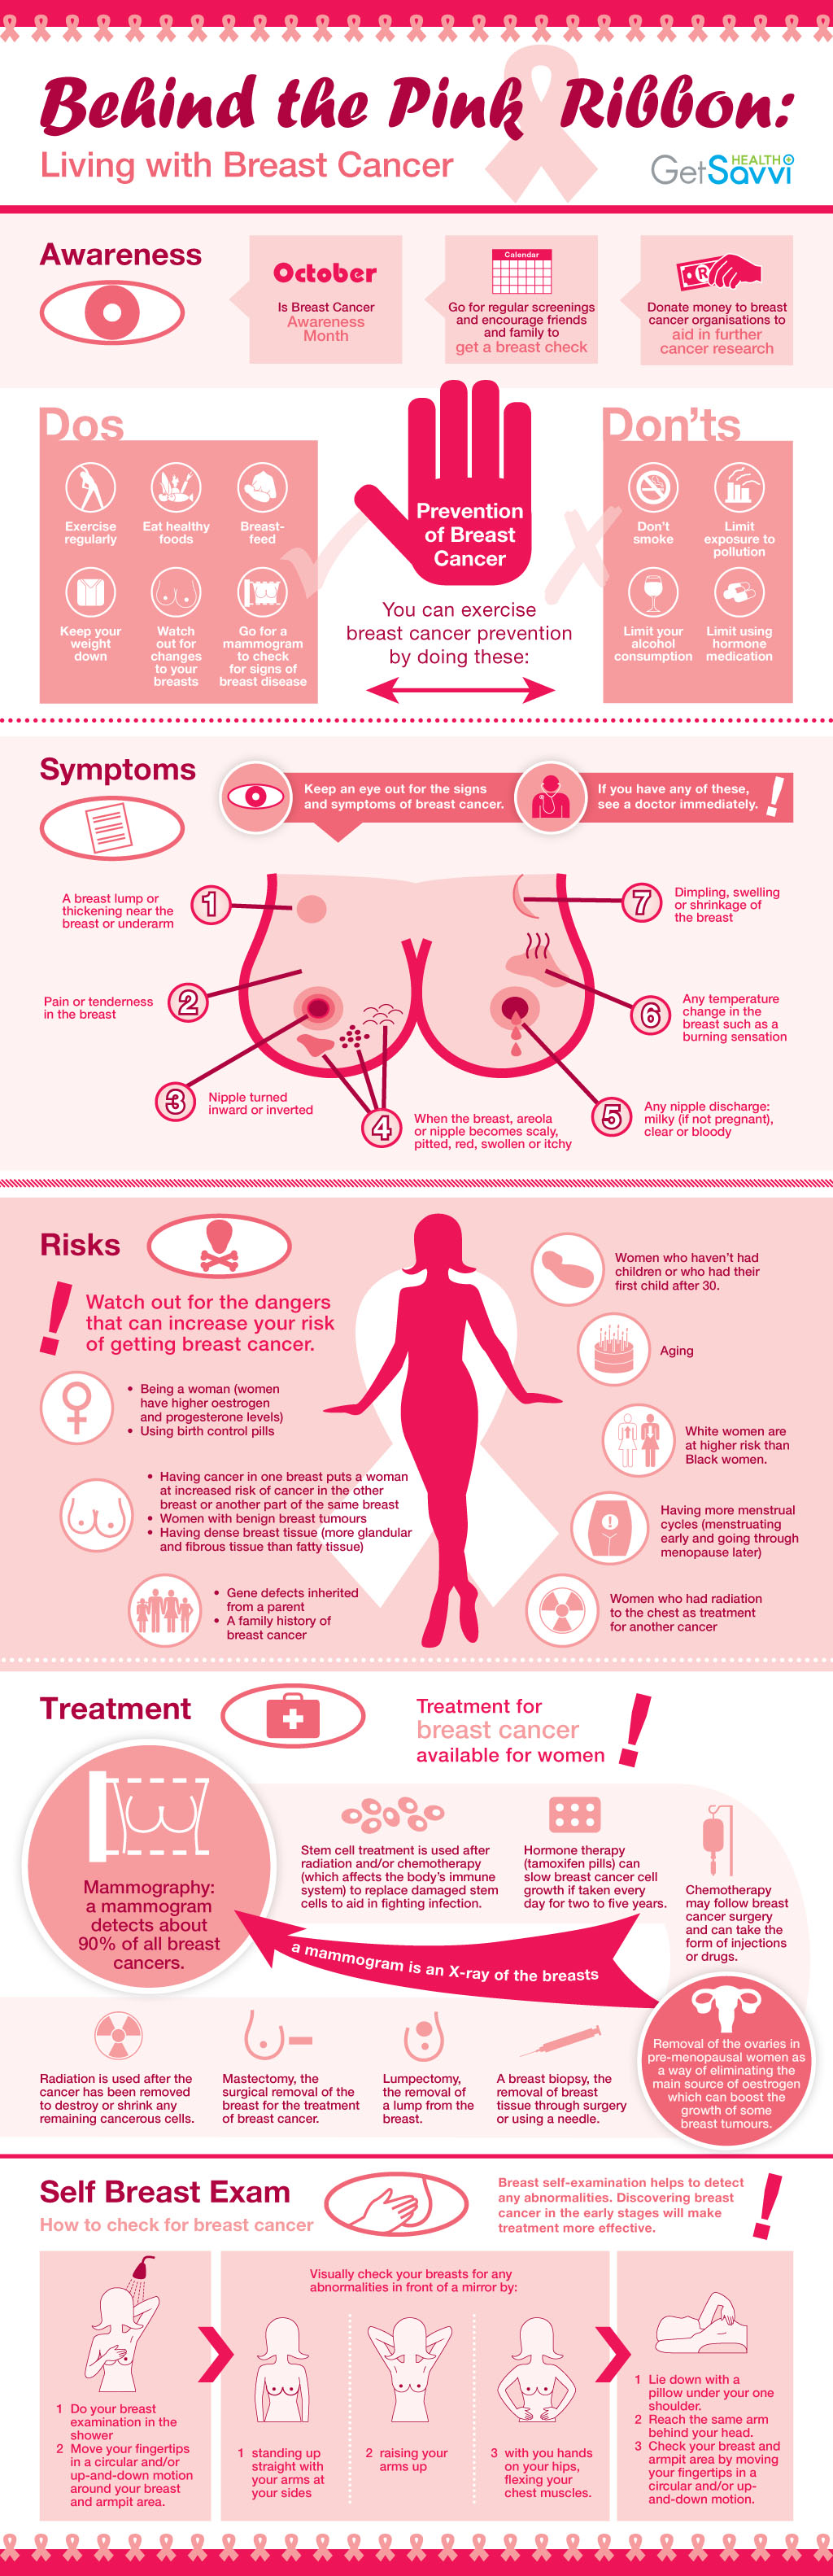 Behind The Pink Ribbon Breast Cancer Awareness